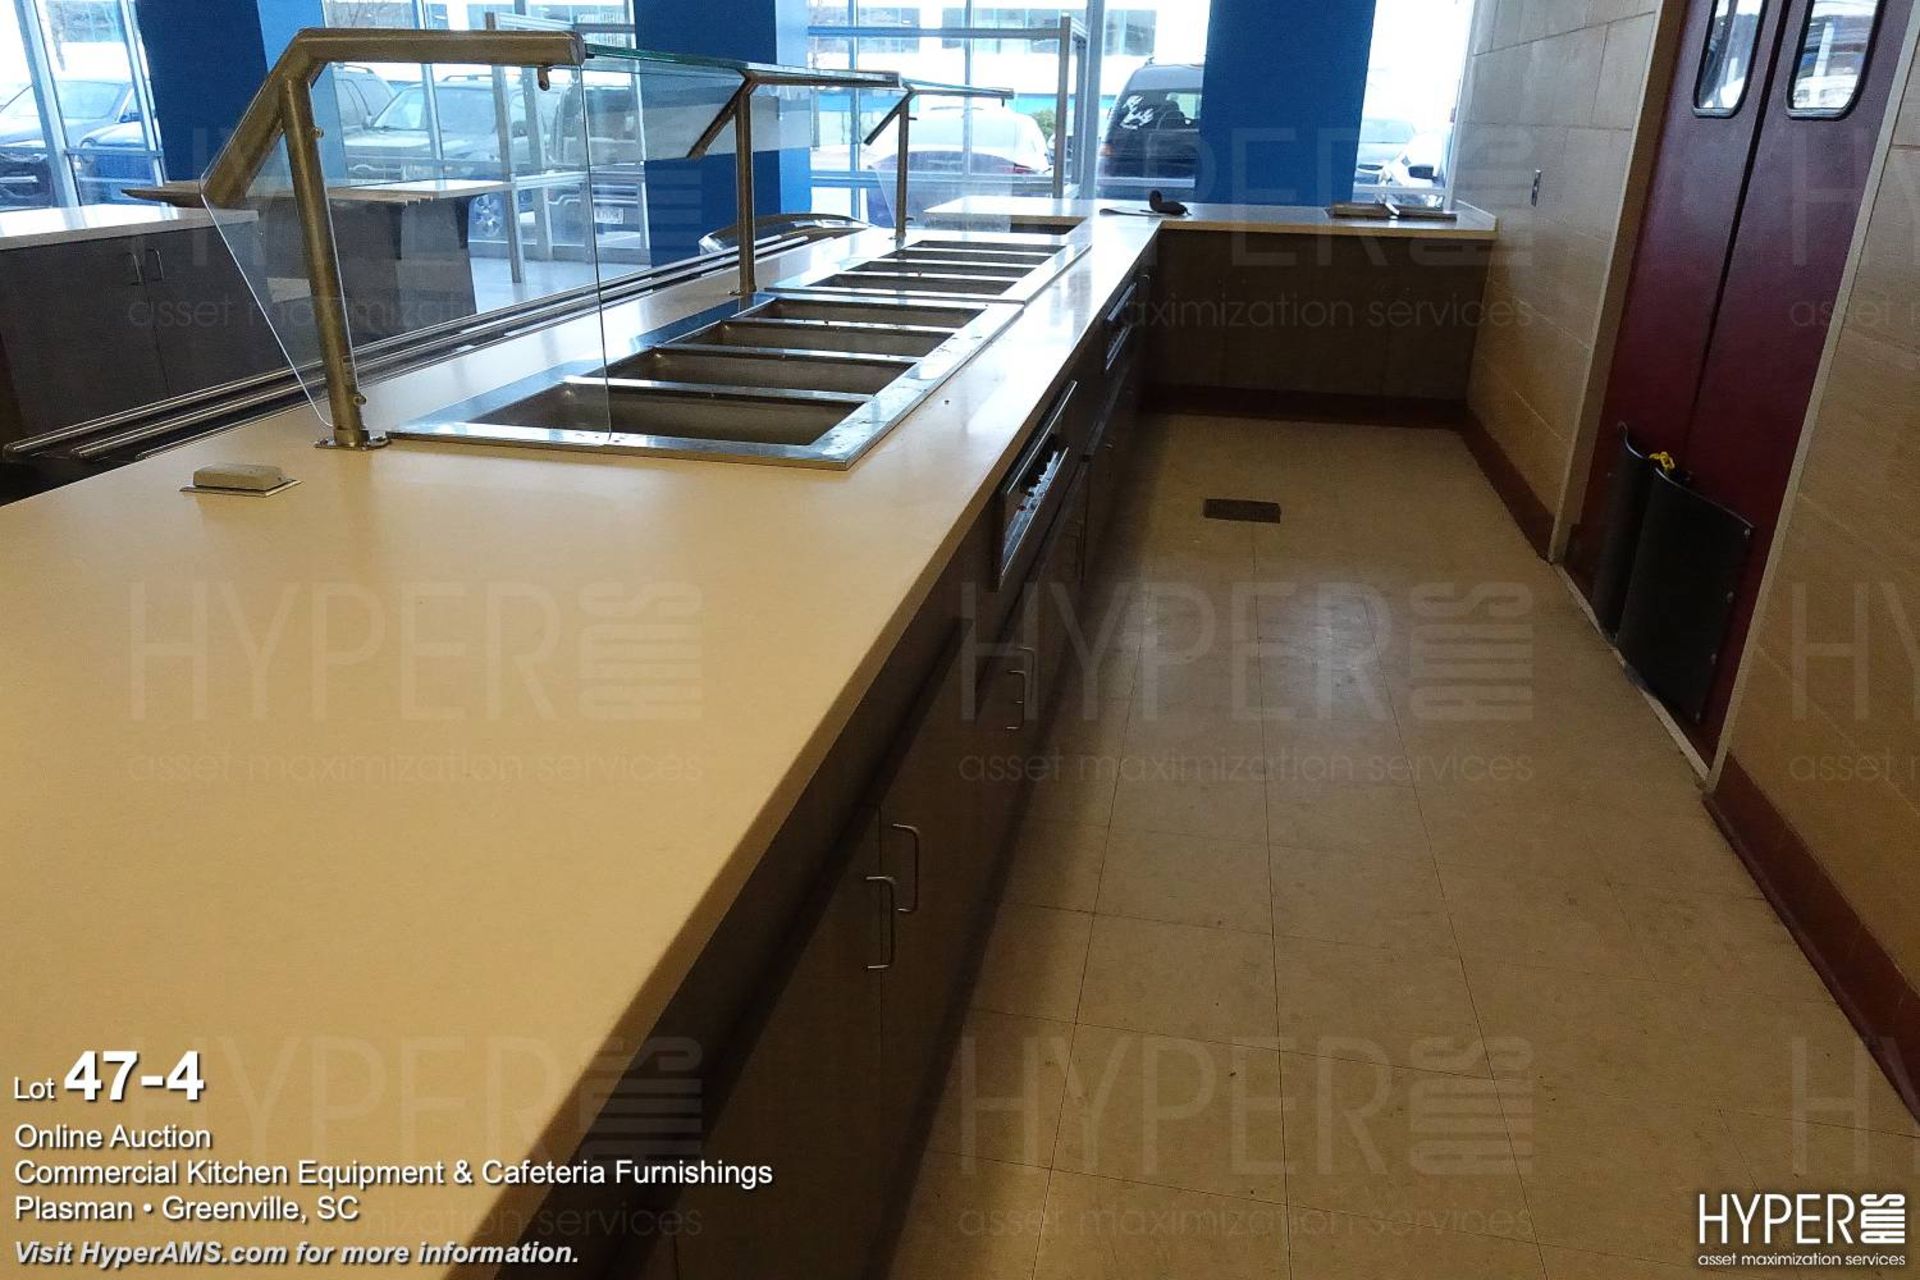 Cafeteria service line and retail counters - Image 5 of 17